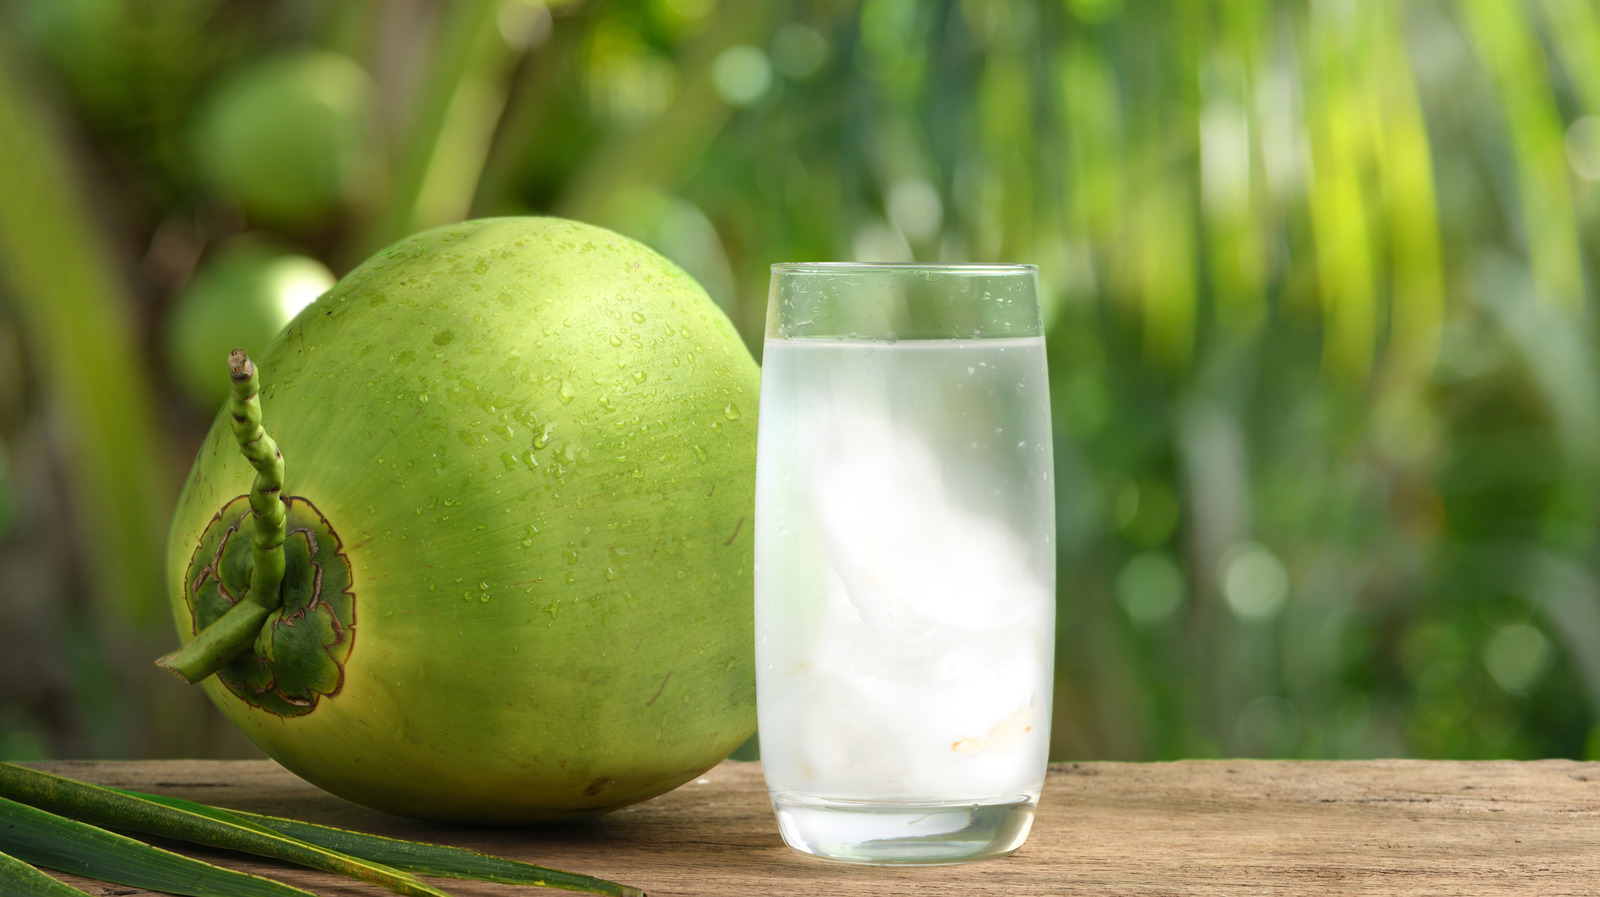 What Could Happen If You Drink Too Much Coconut Water